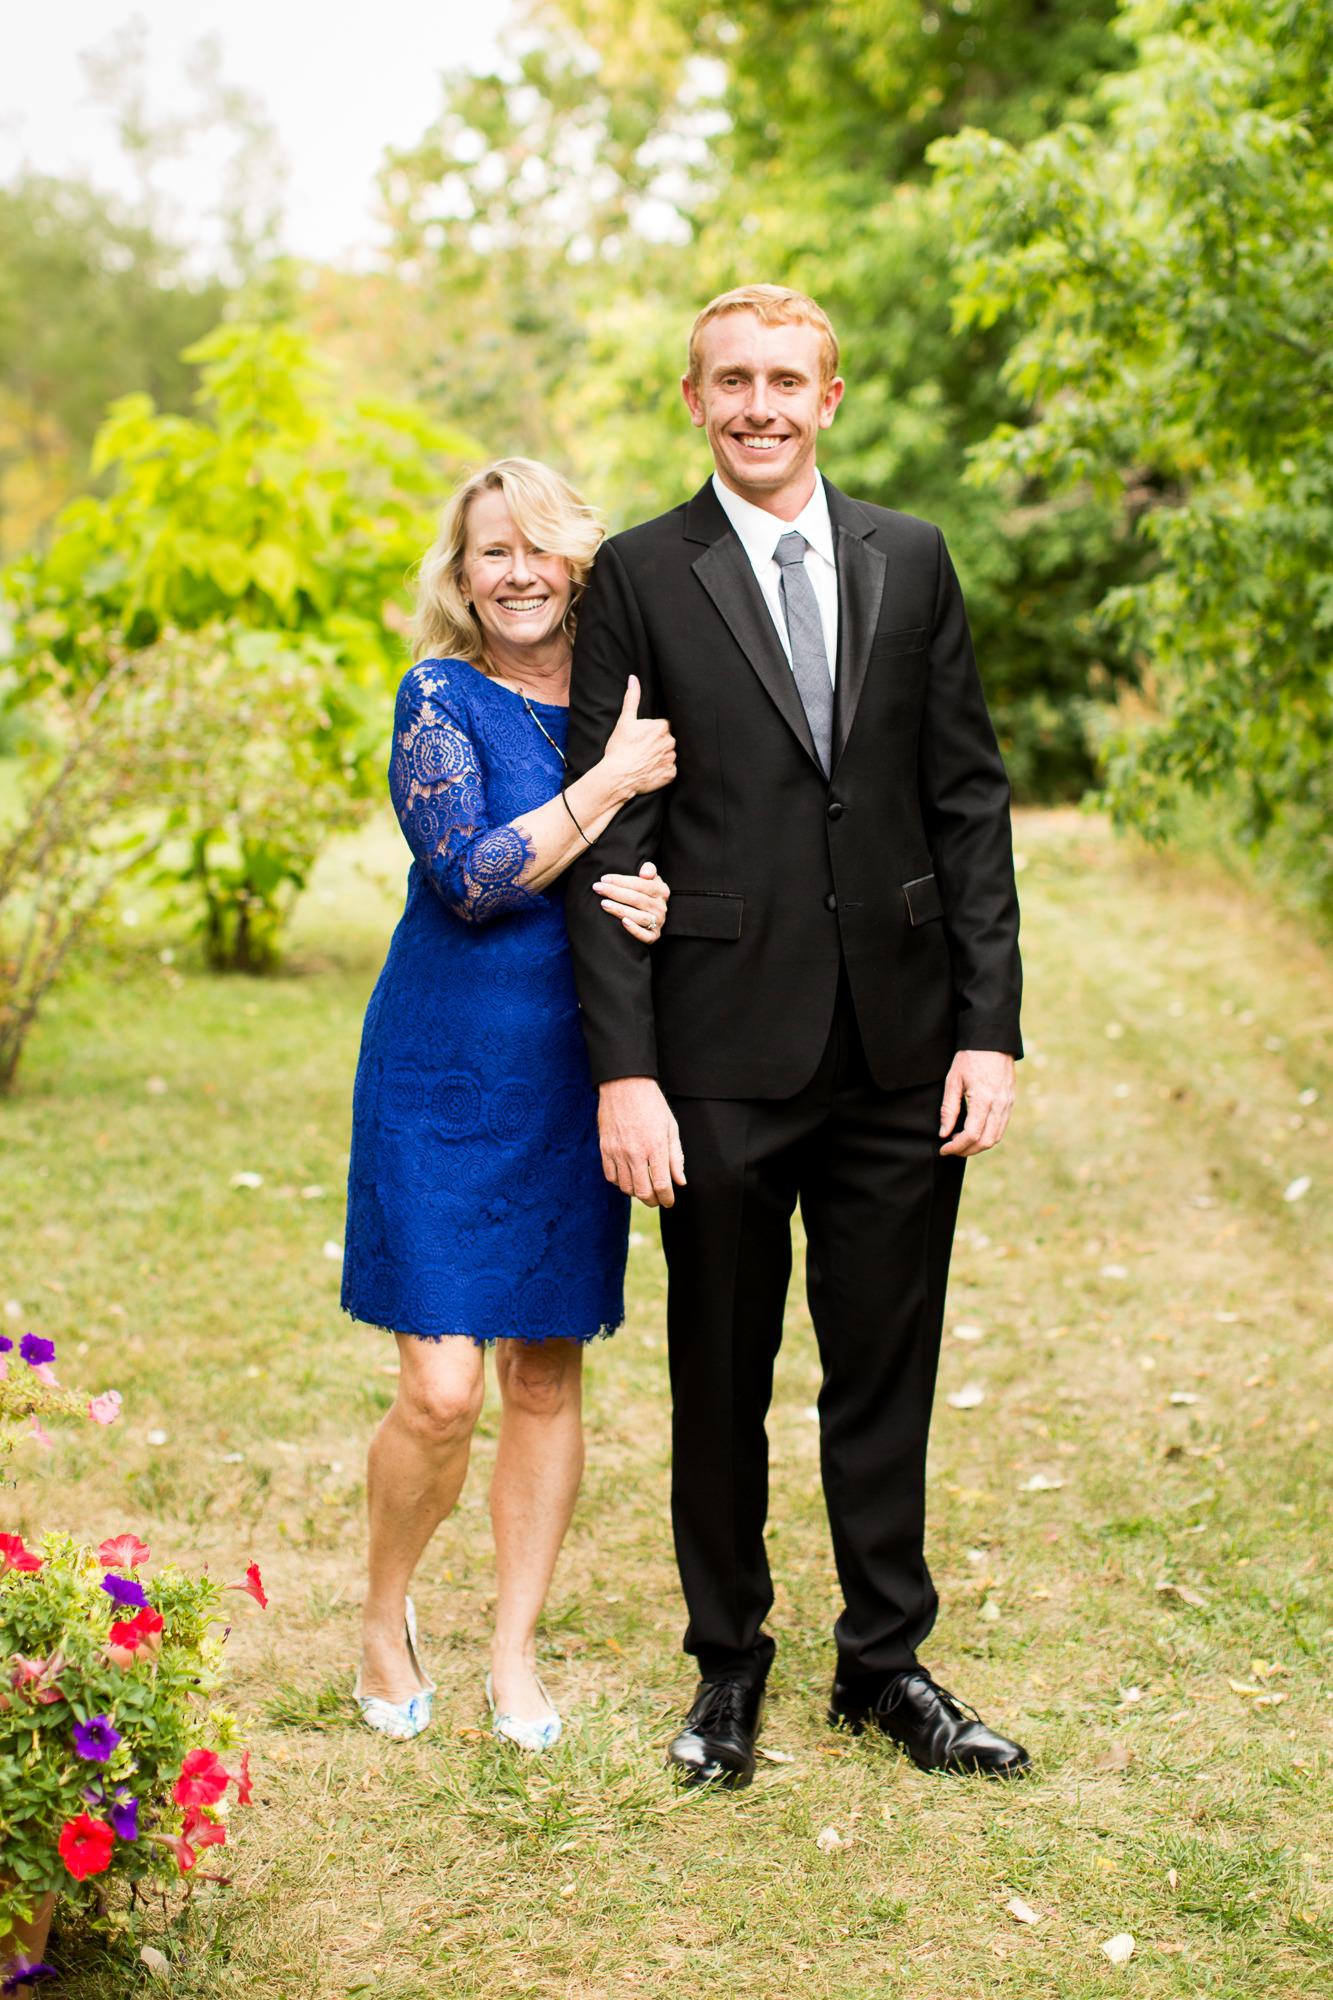 Portrait of a mom and groom on a Longmont, CO wedding day